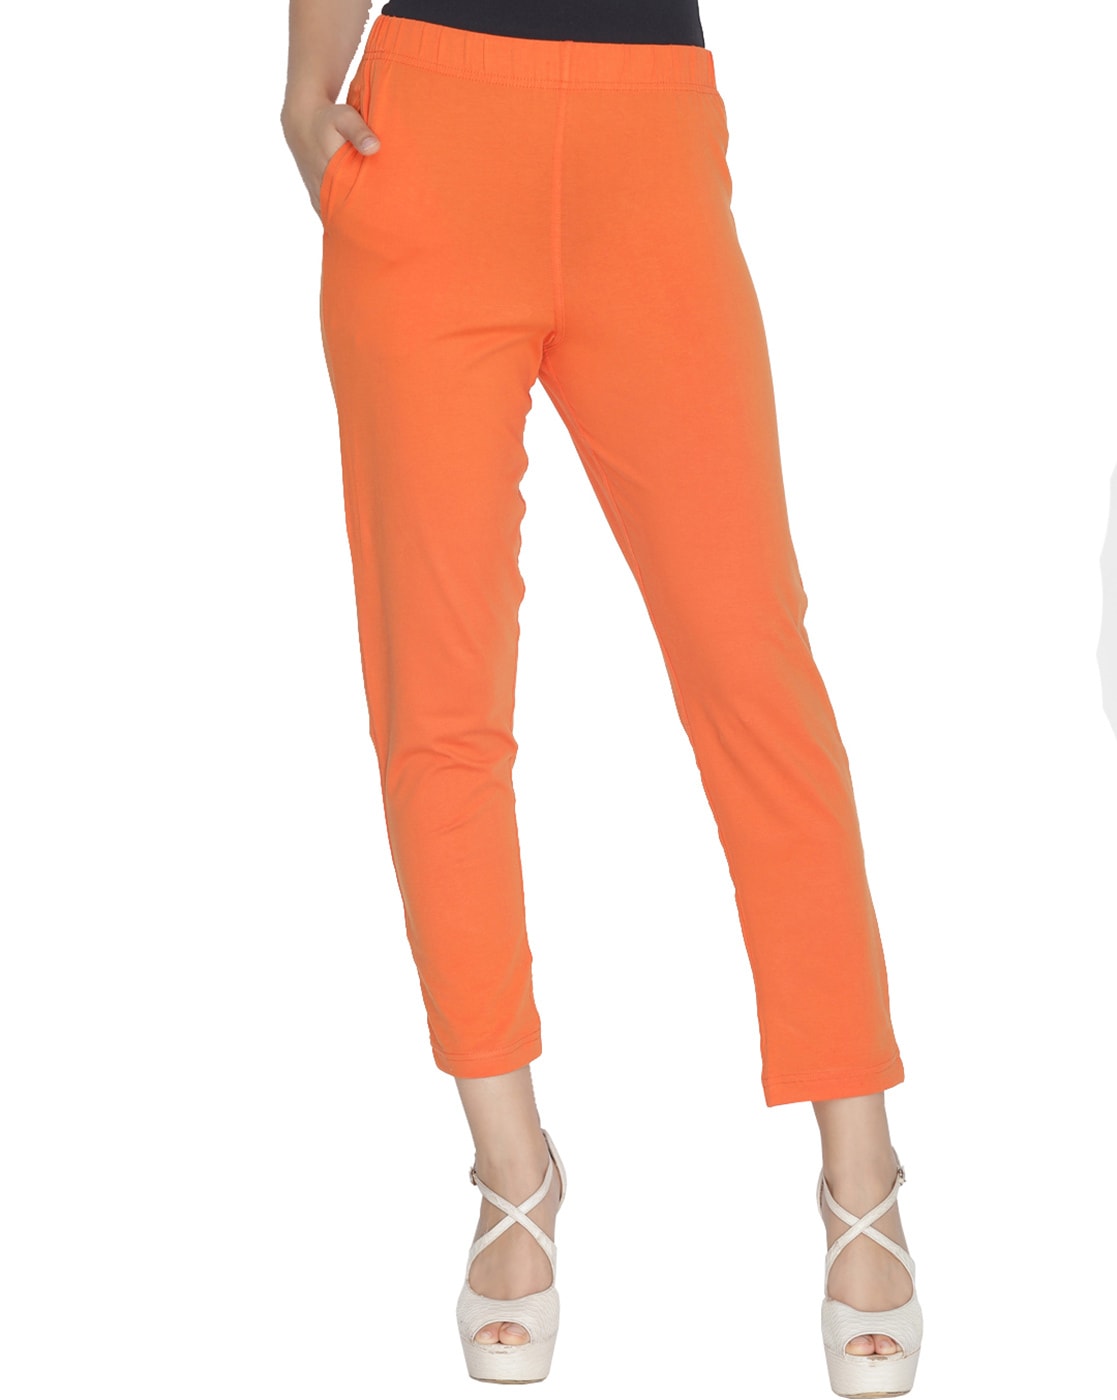 LUX Lyra Womens Ankle Length Leggings  Online Shopping site in India